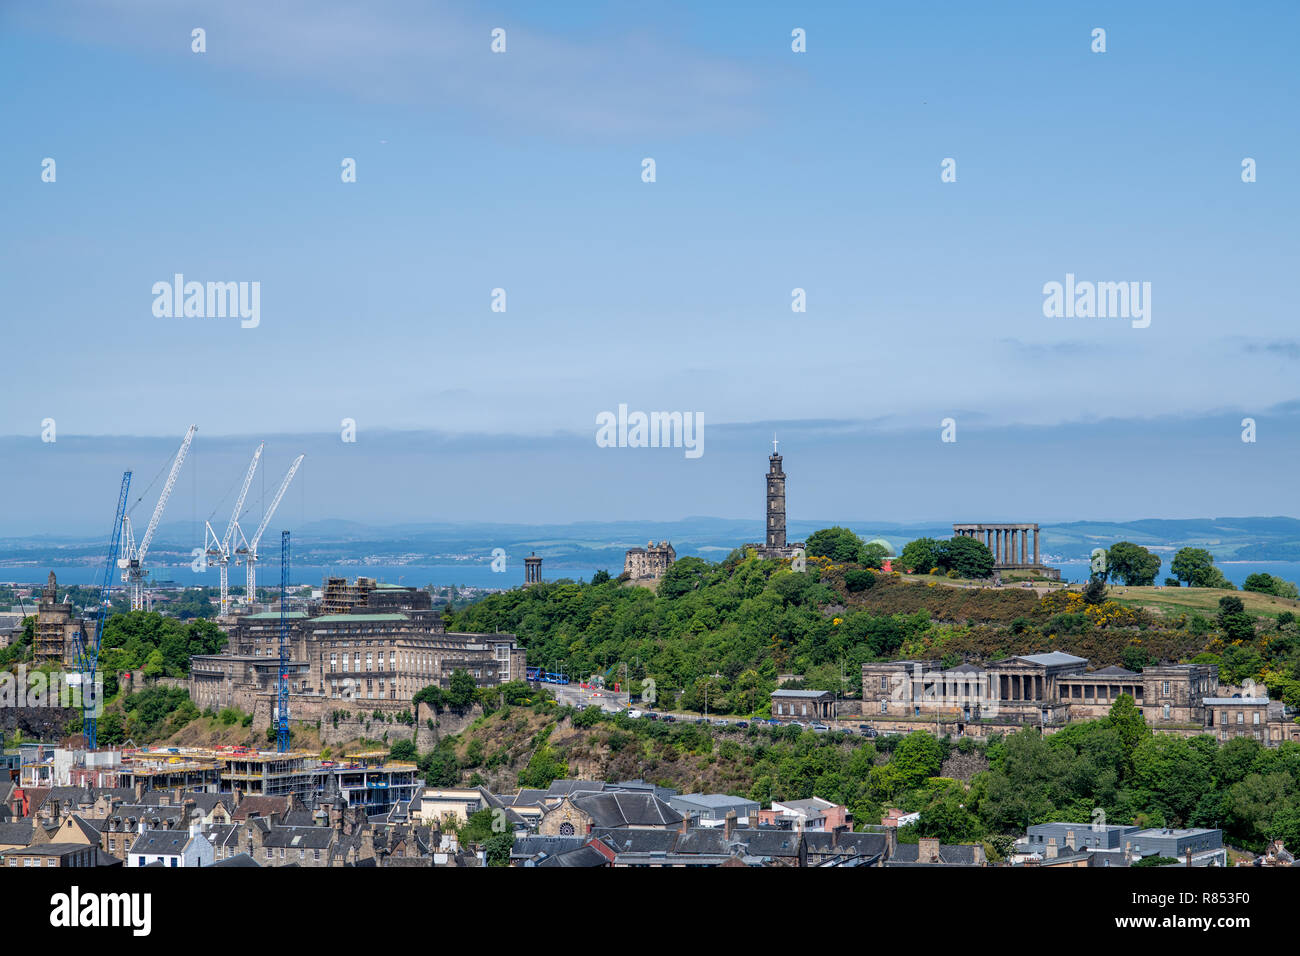 An elevated view of the iconic landmarks of Calton Hill, rooftops and the cityscape of Edinburgh, Scotland, UK. Stock Photo